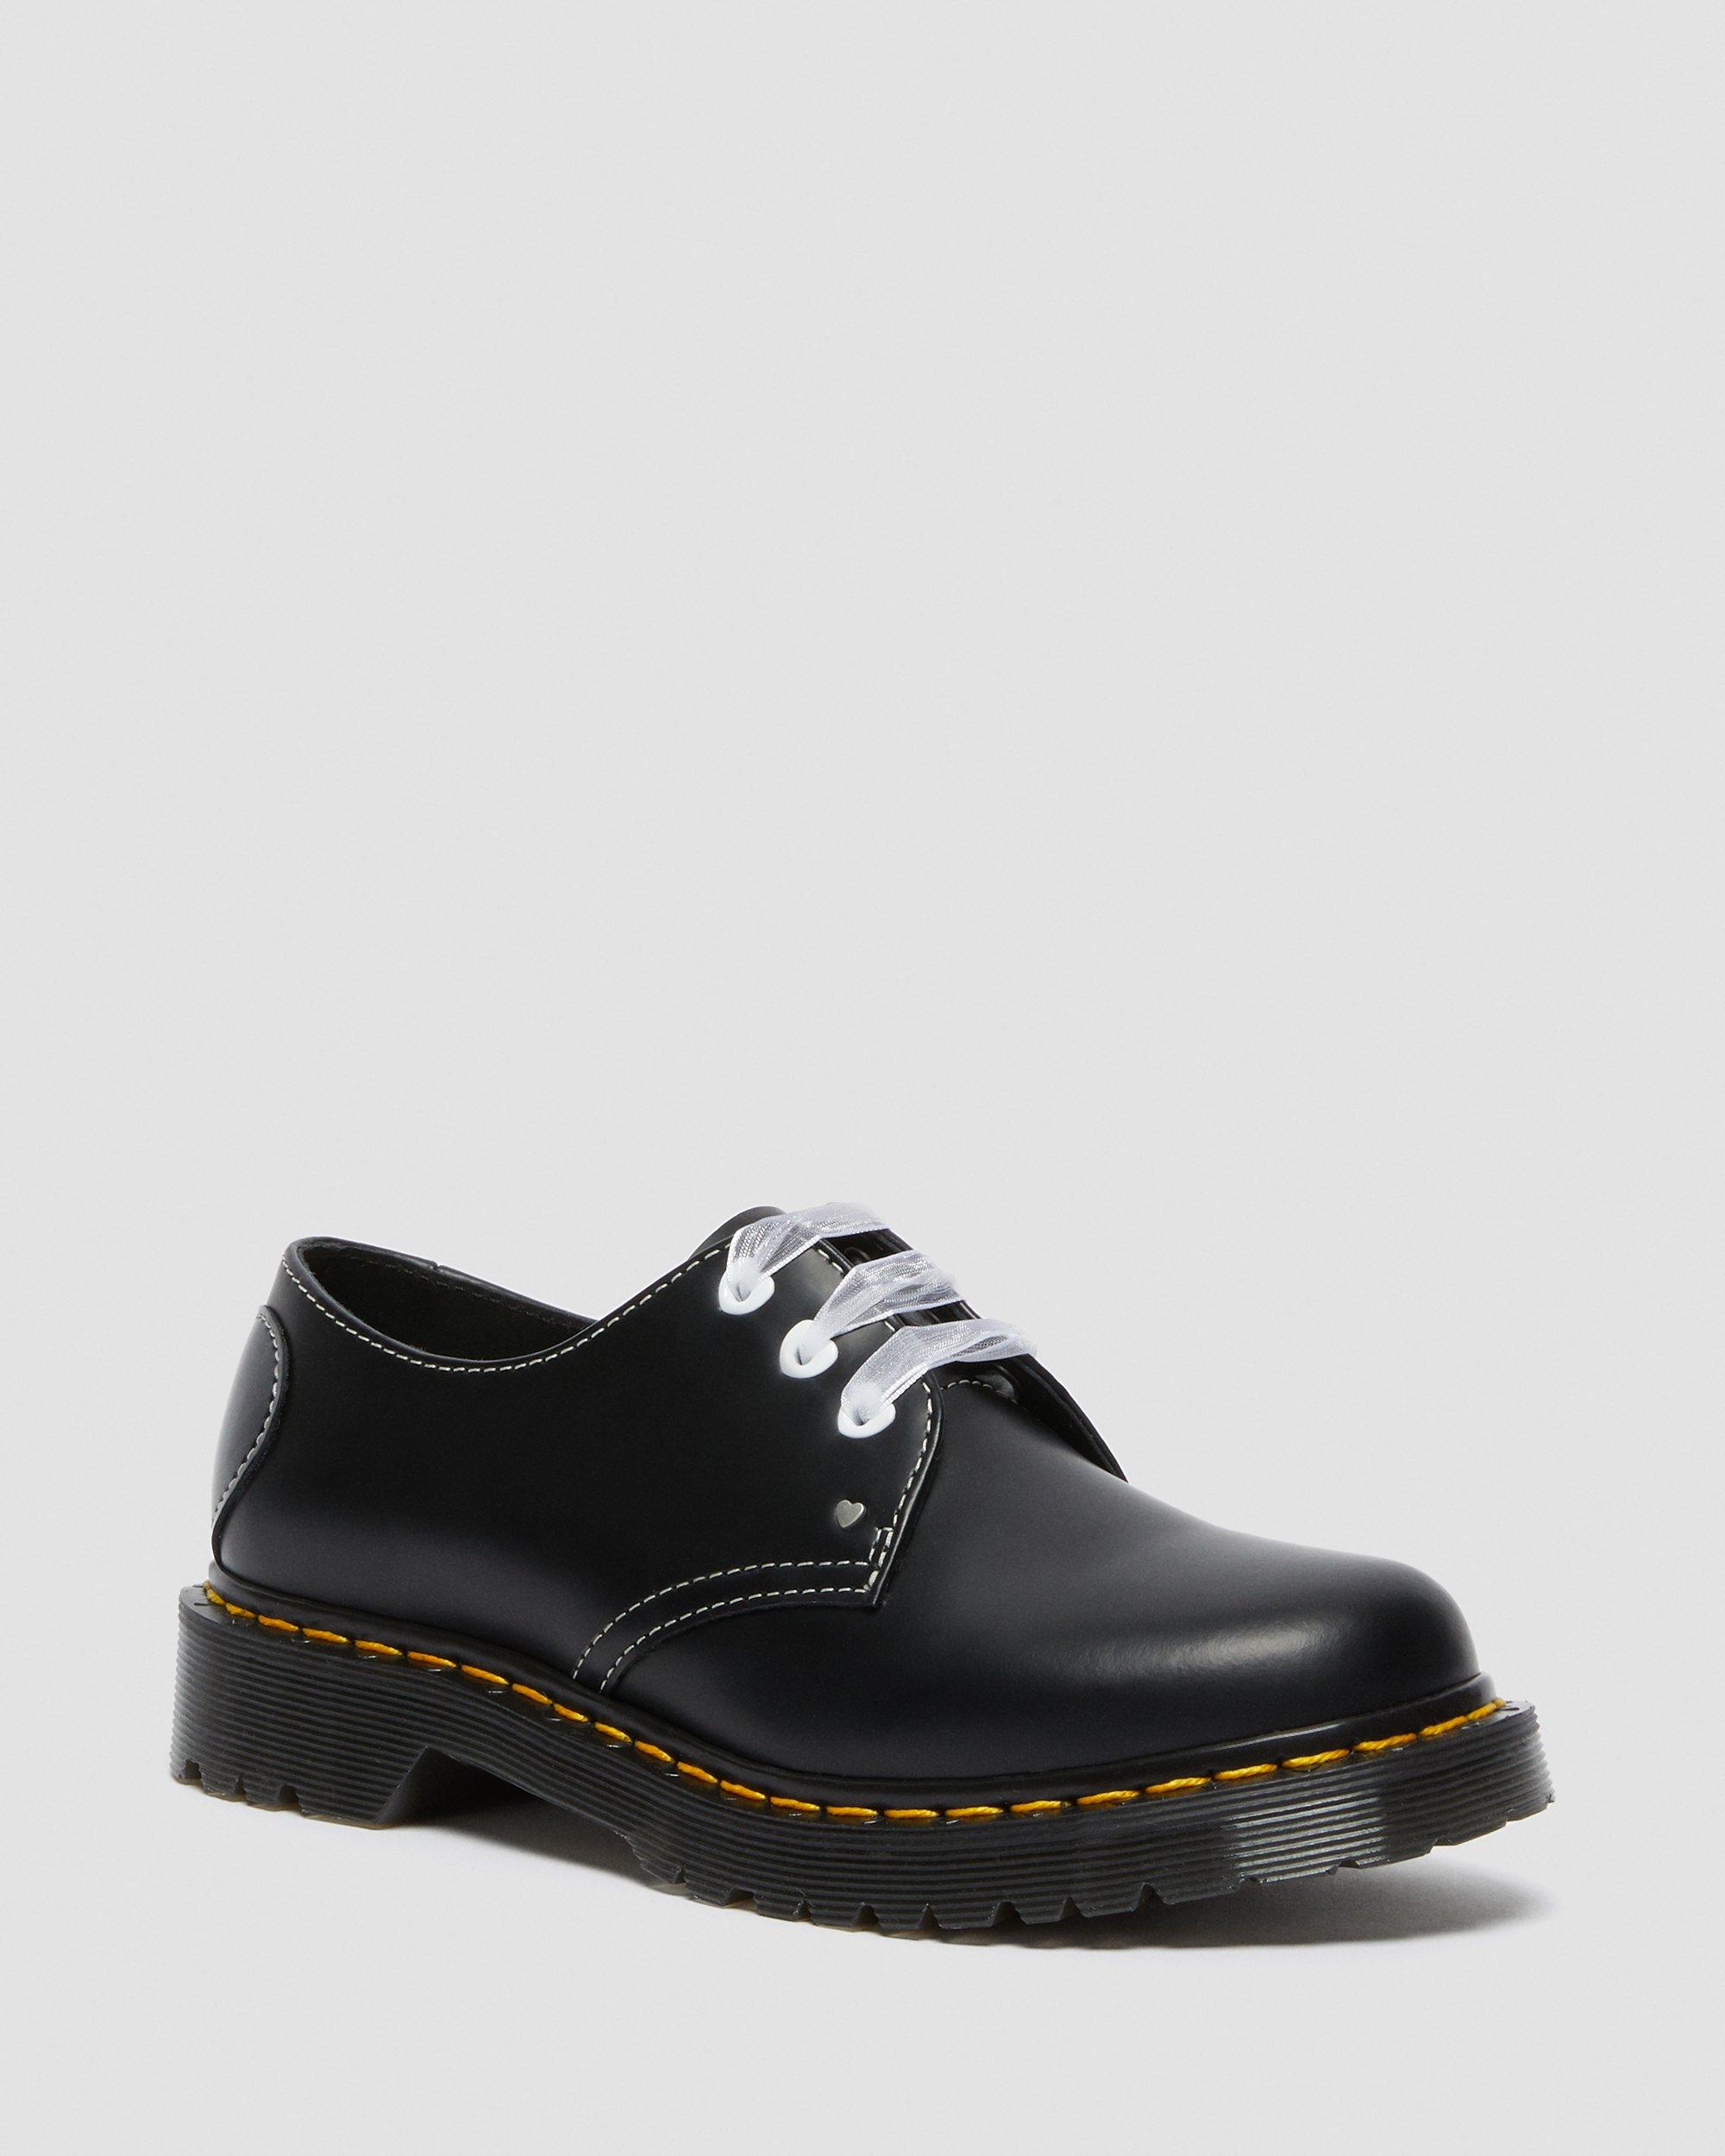 DR MARTENS 1461 Hearts Smooth & Patent Leather Oxford Shoes